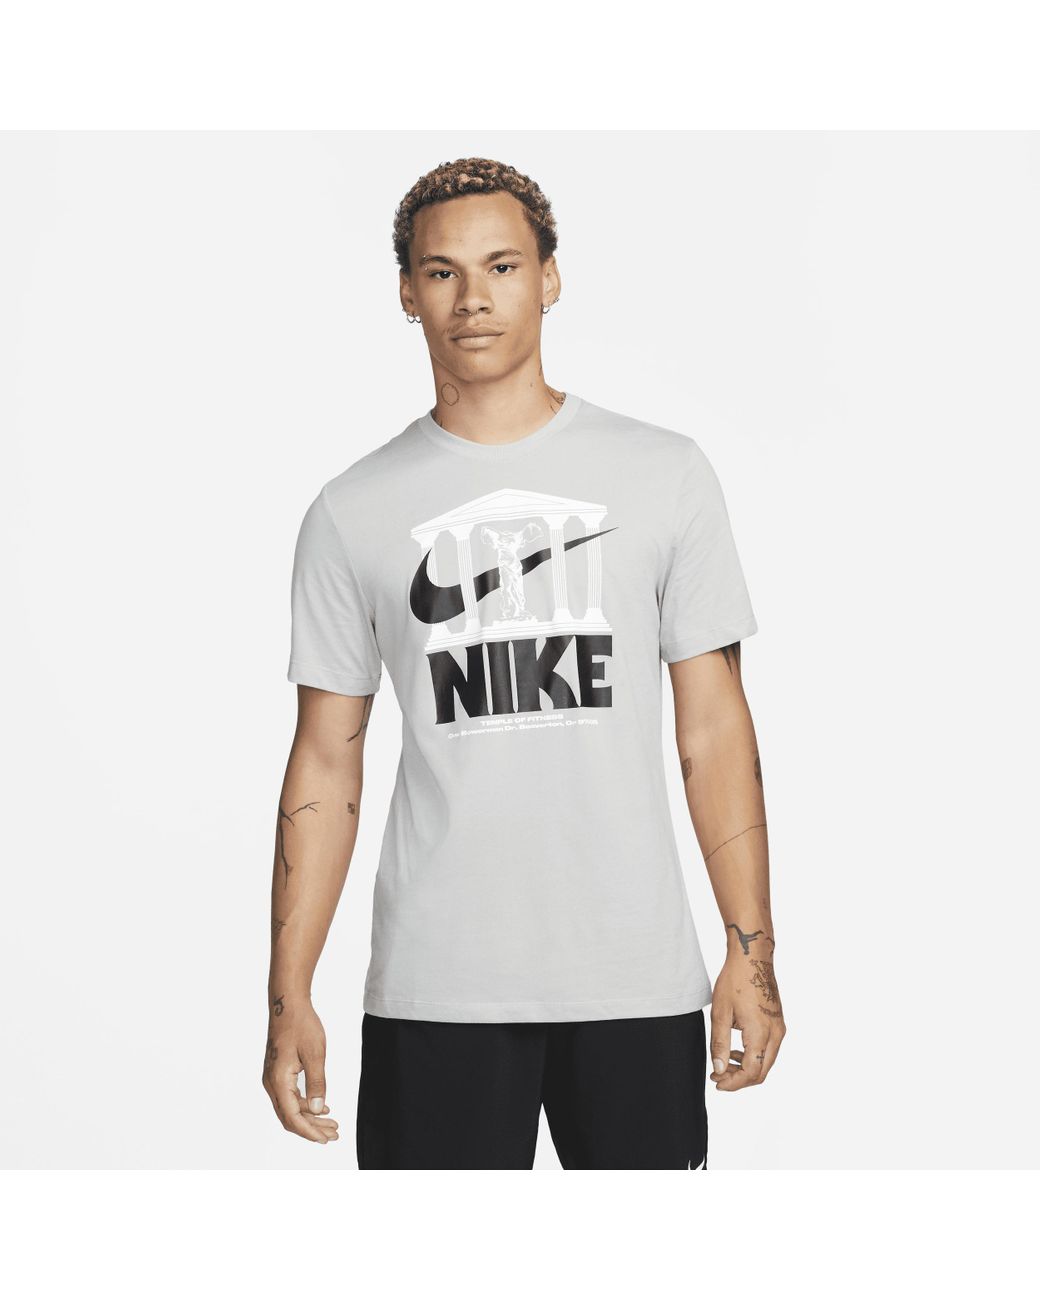 Nike Dri-fit "wild Card" Fitness T-shirt In Grey, in White for Men | Lyst